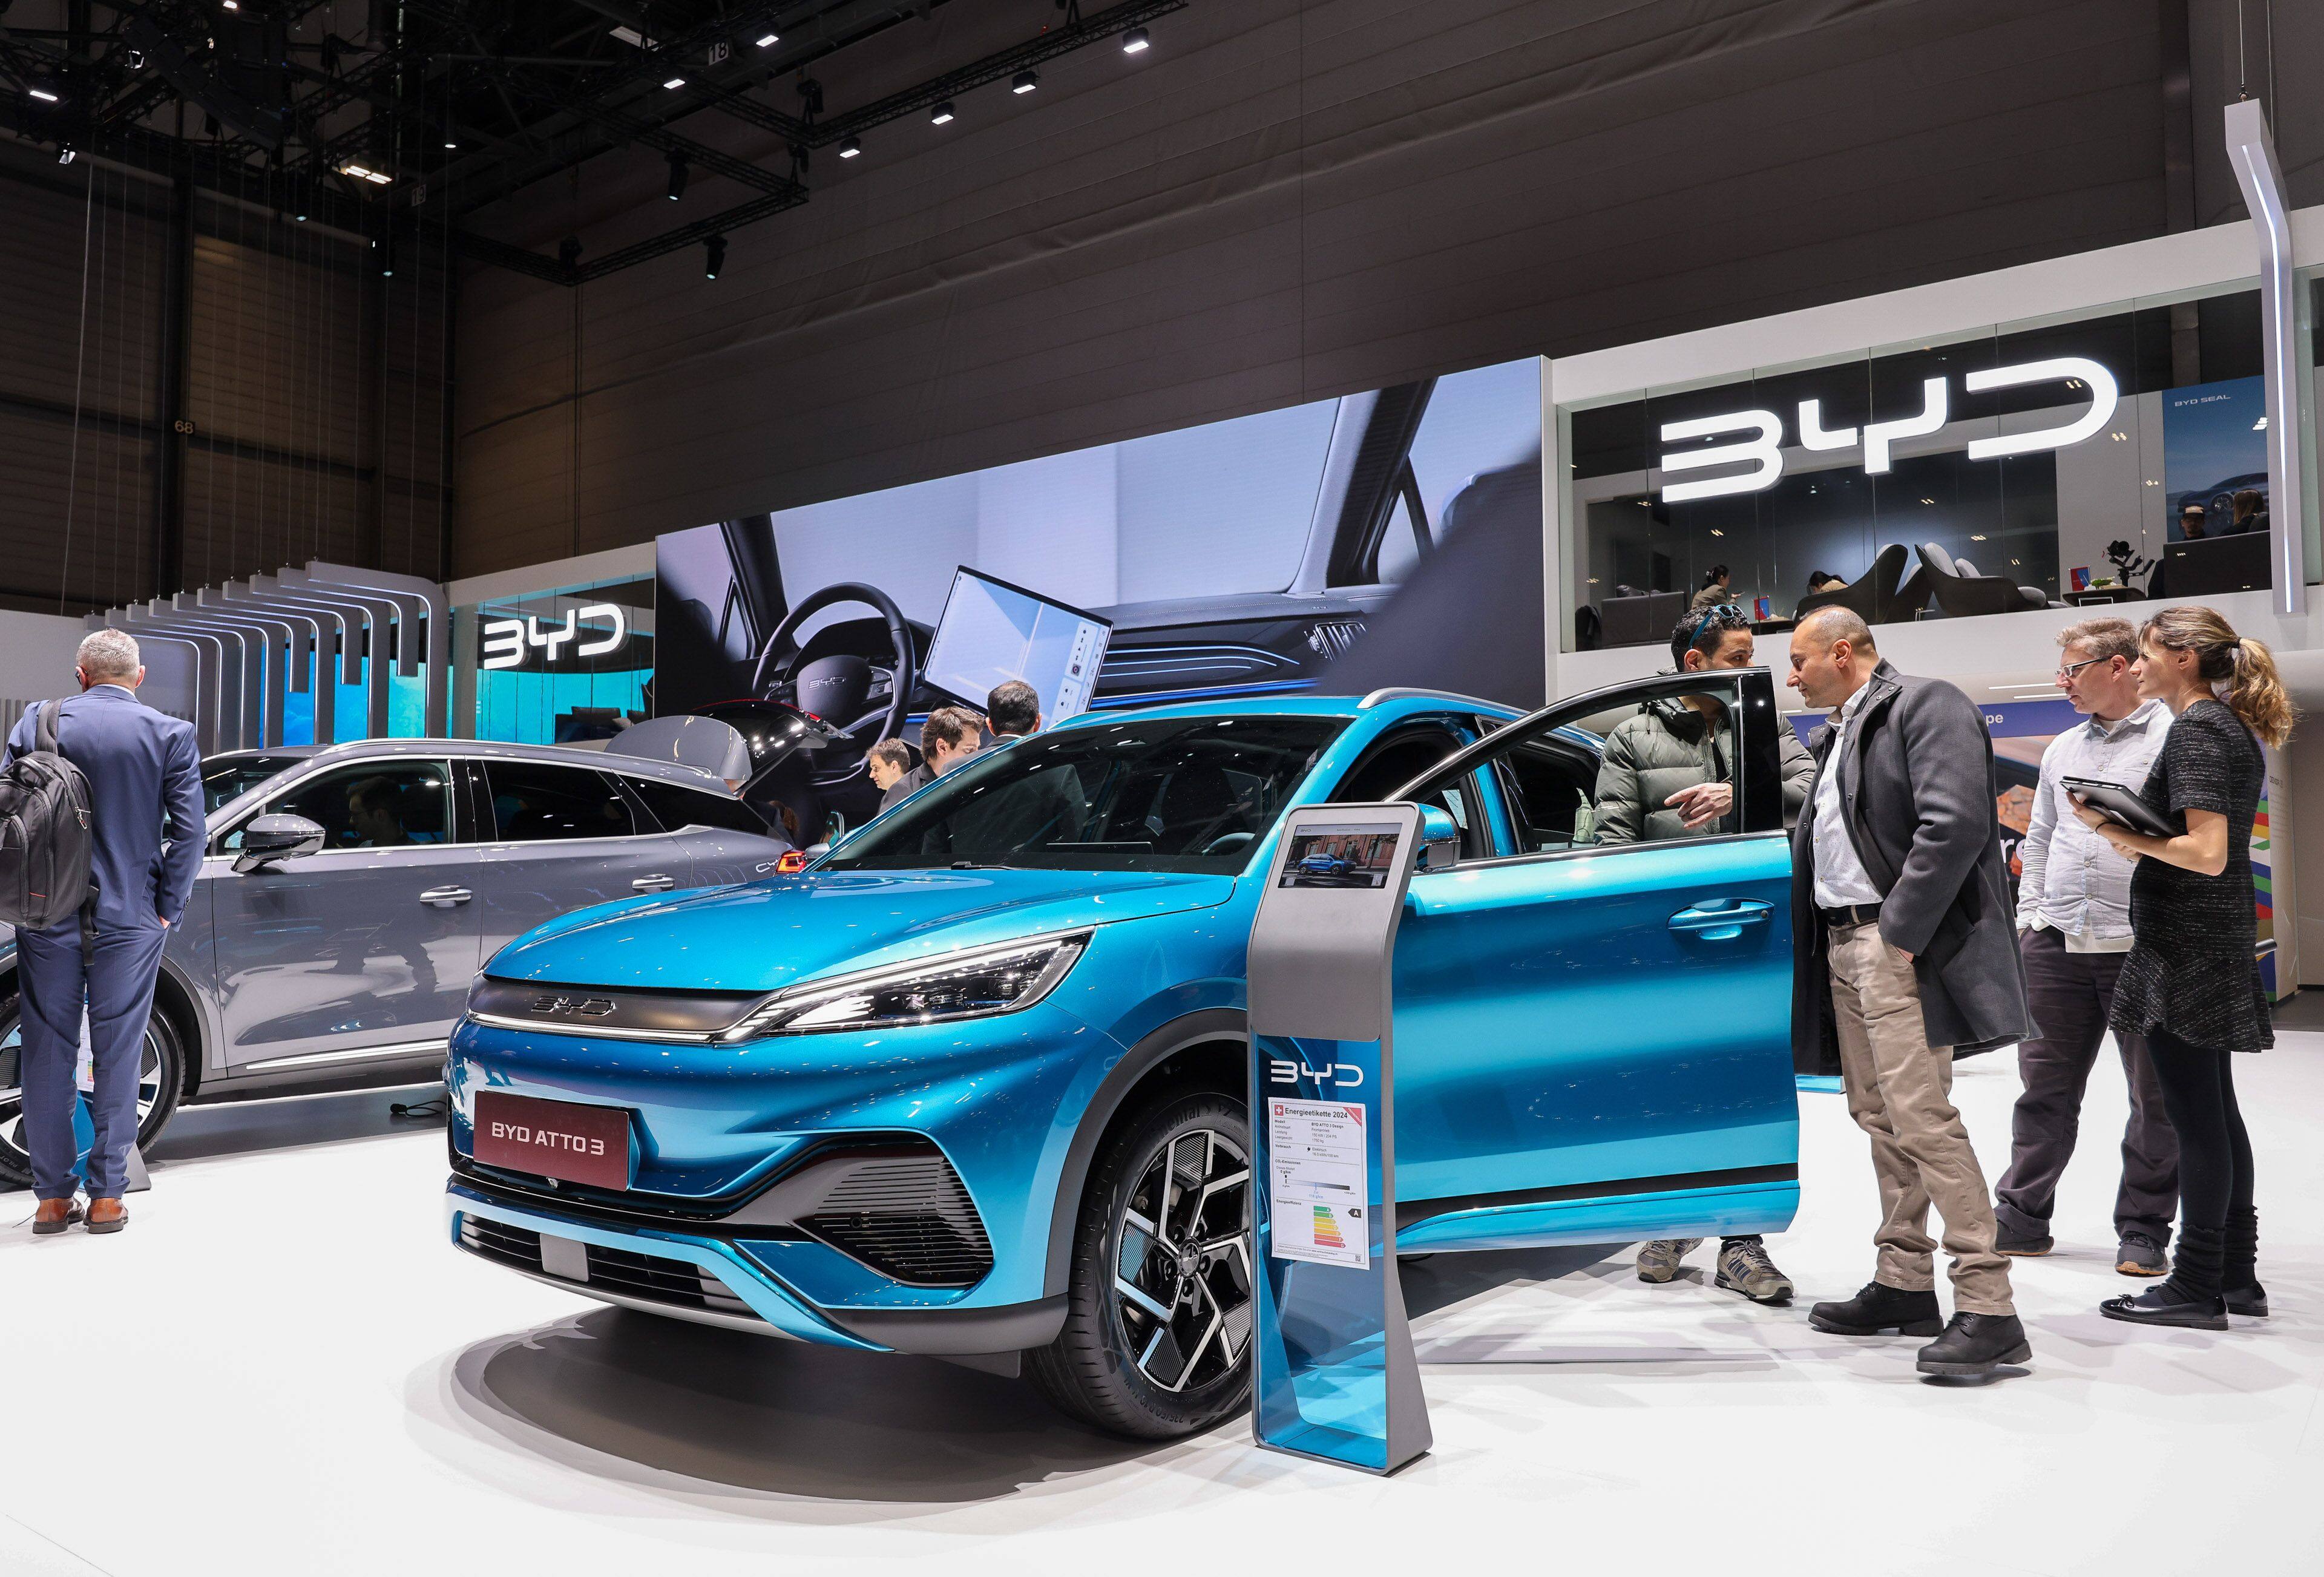 People check out a BYD Atto 3 electric vehicle at the Geneva International Motor Show in Switzerland, on February 27. The Chinese automaker’s SUV has received full marks for safety from European inspectors. Photo: Bloomberg